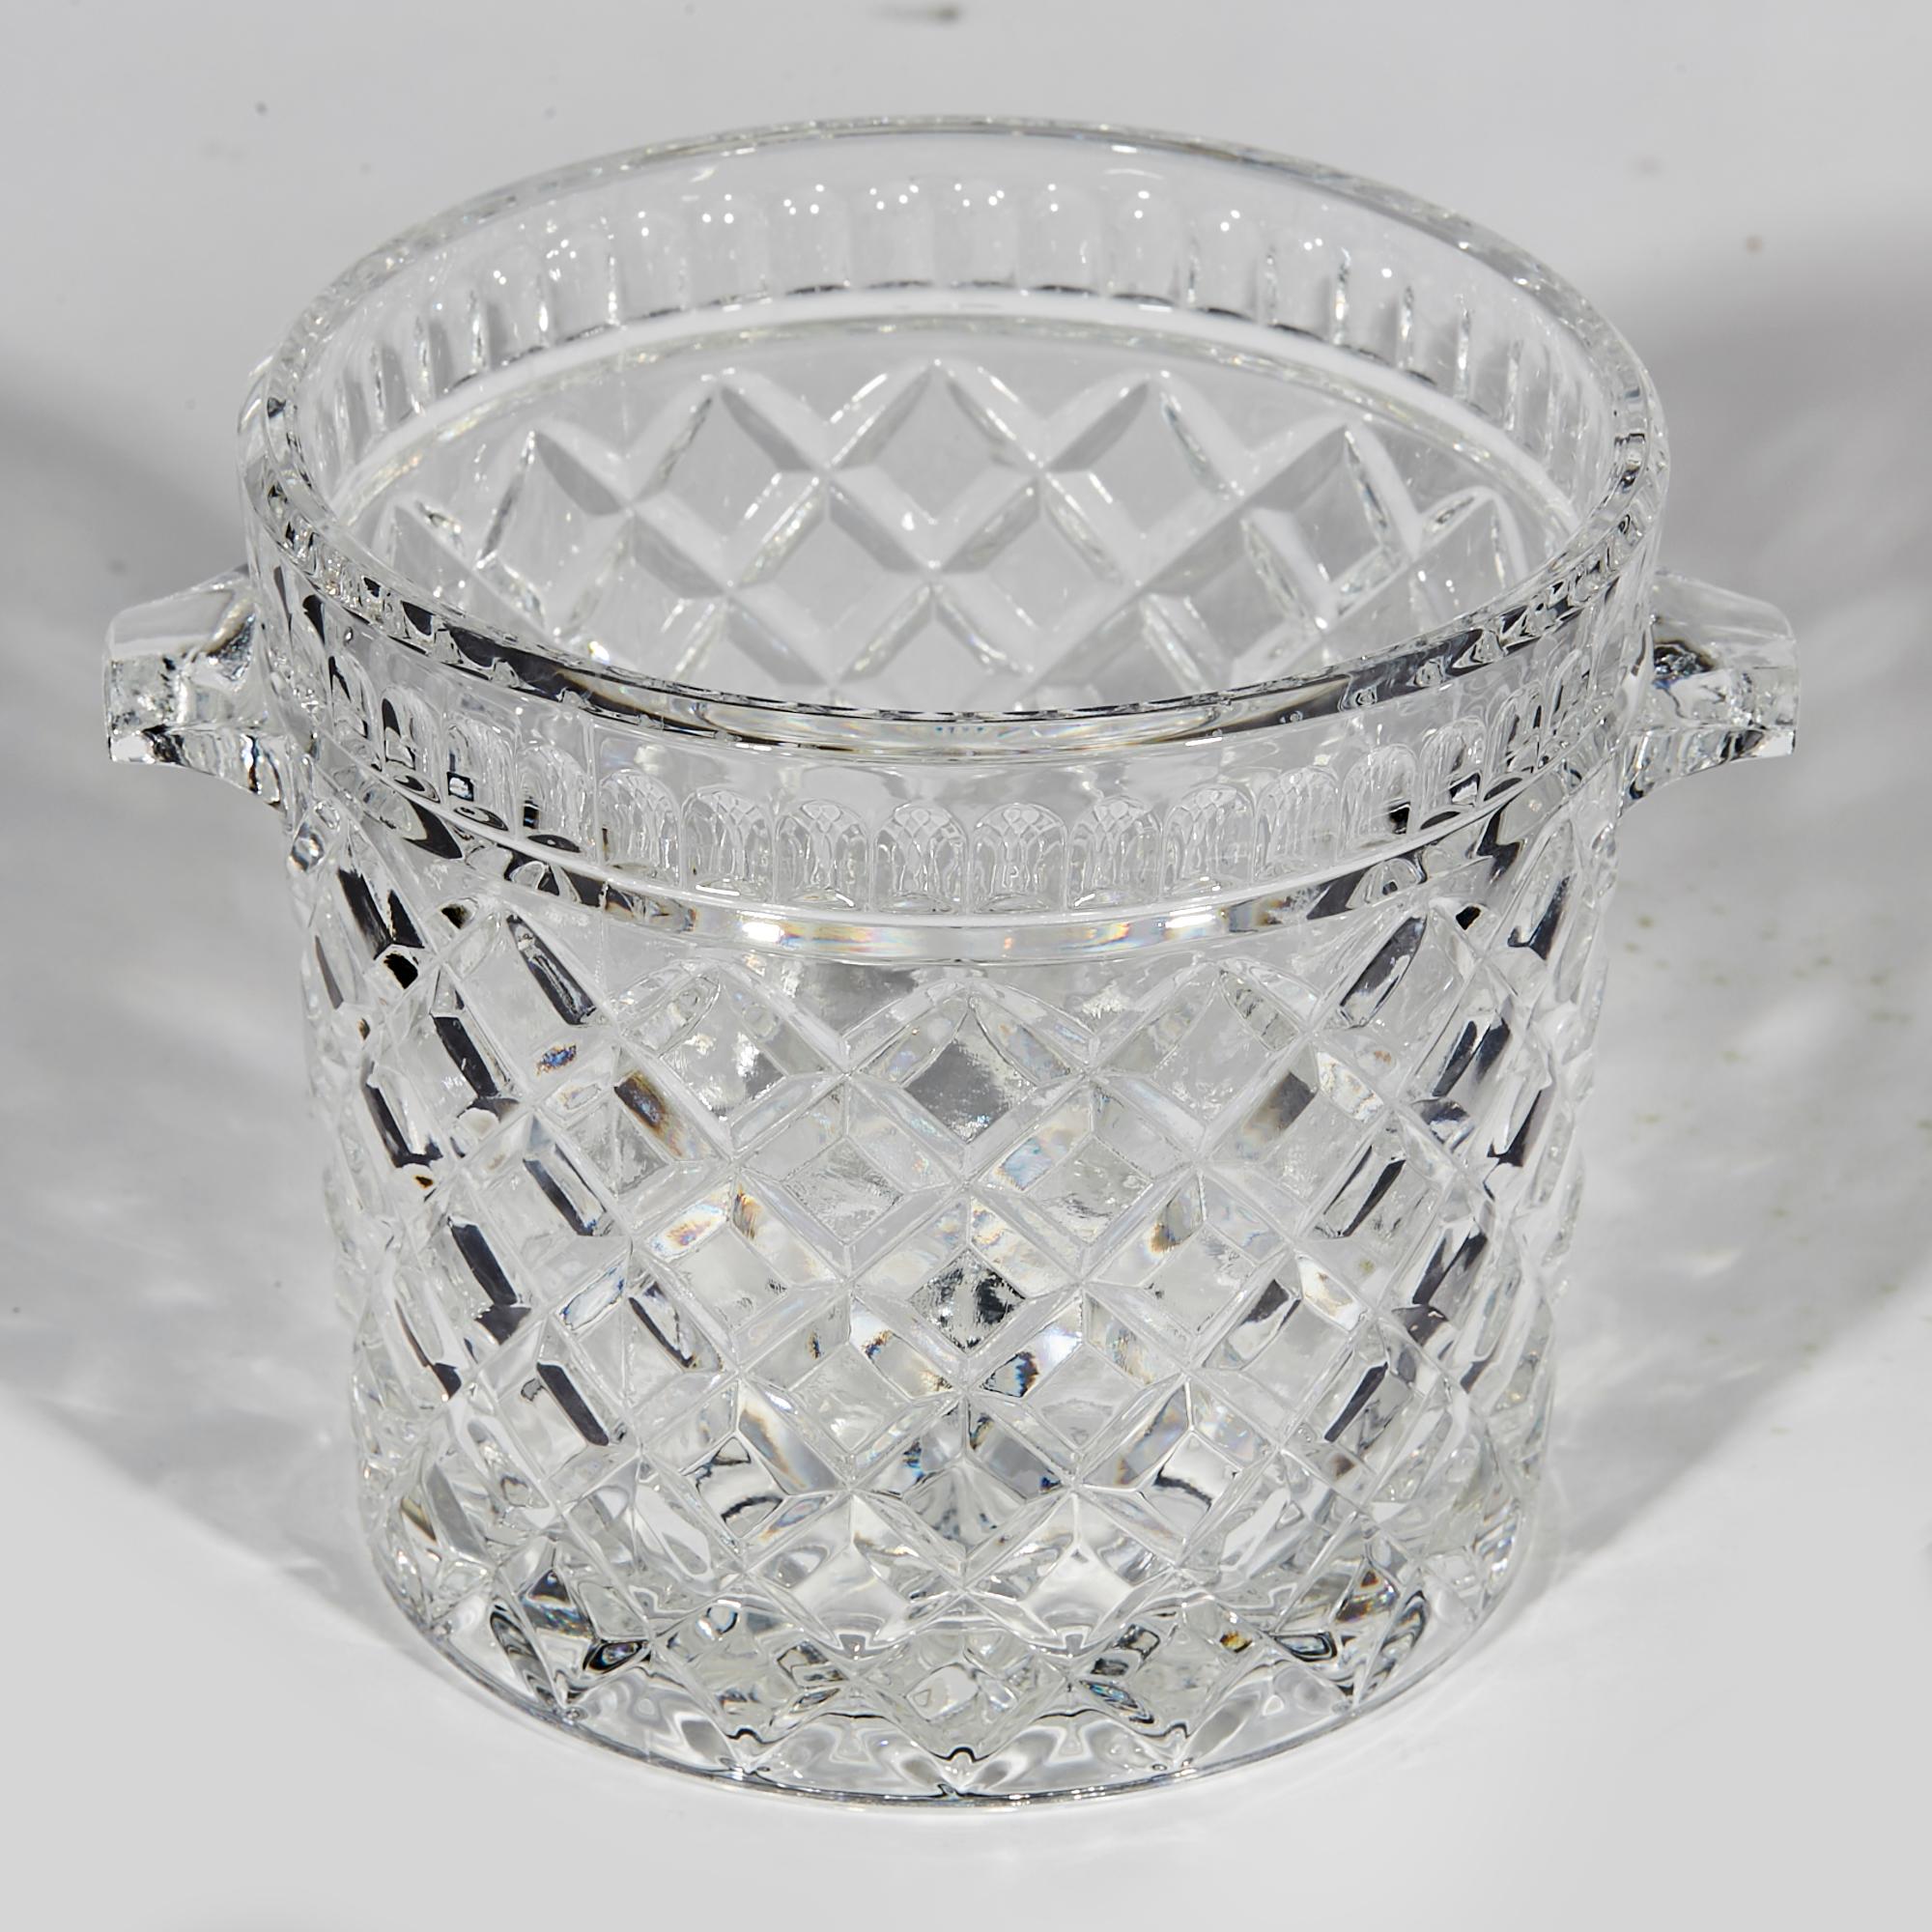 Vintage 1960s solid crystal waffle designed glass ice bucket. No marks. In very good used condition.